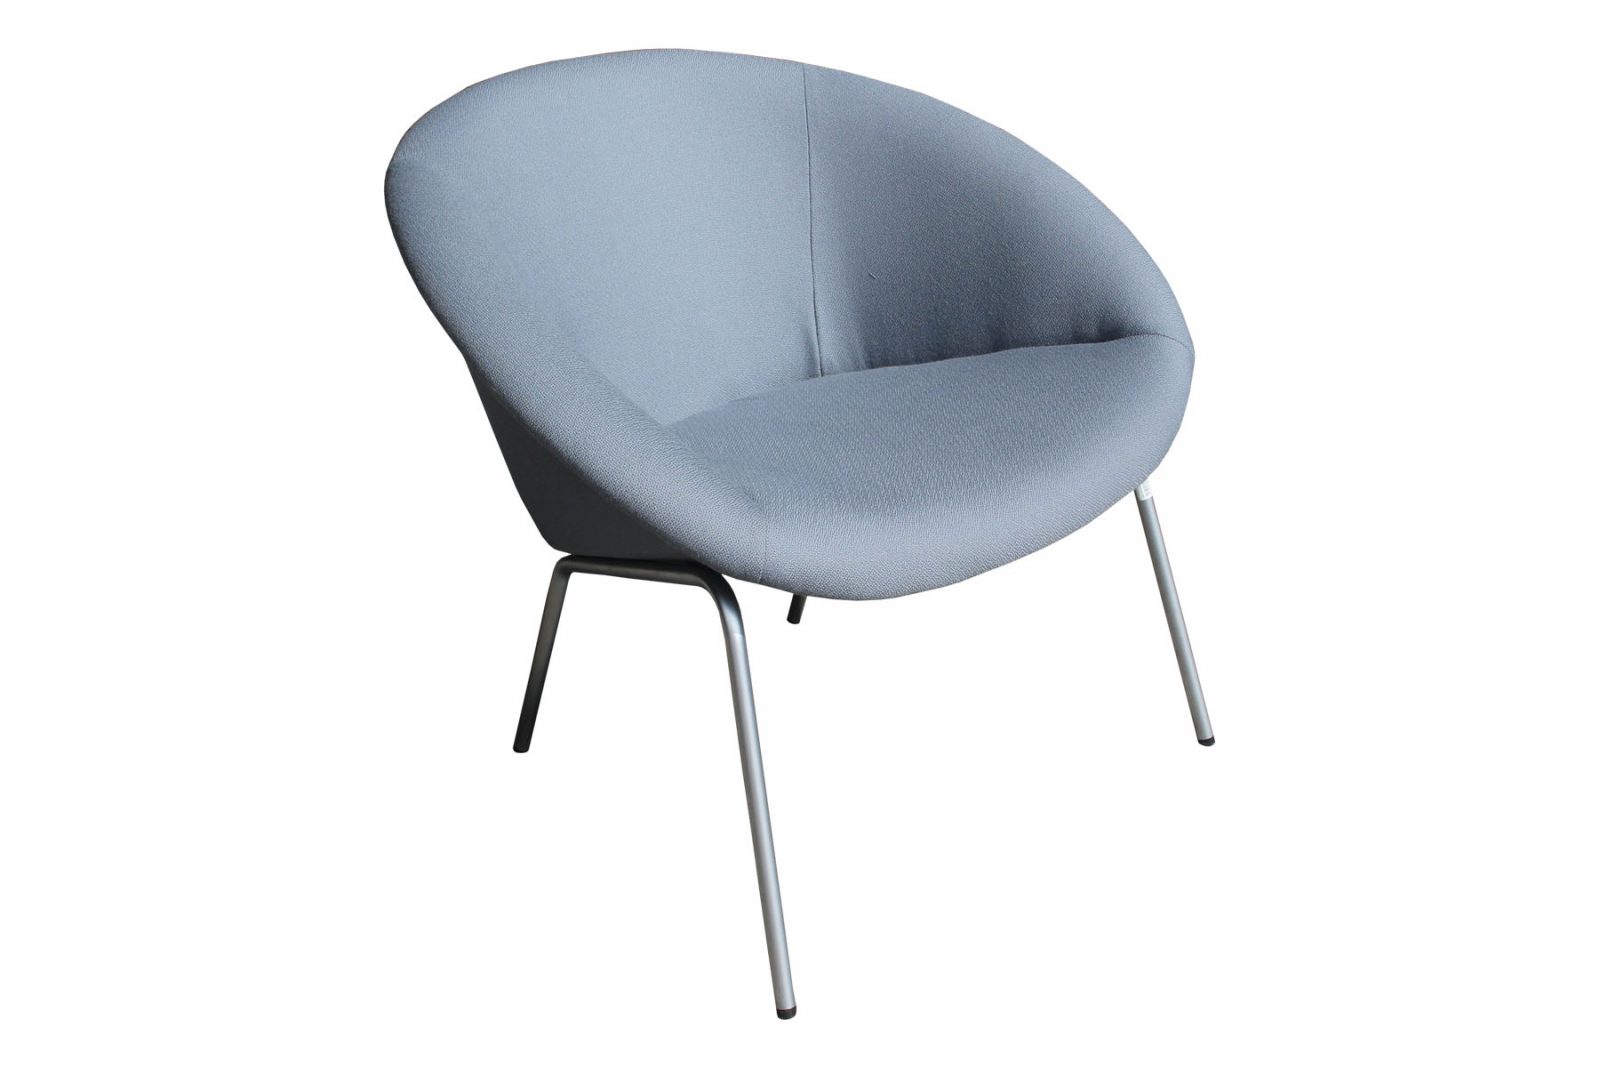 Walter Knoll 369 After E01 1600x1067 